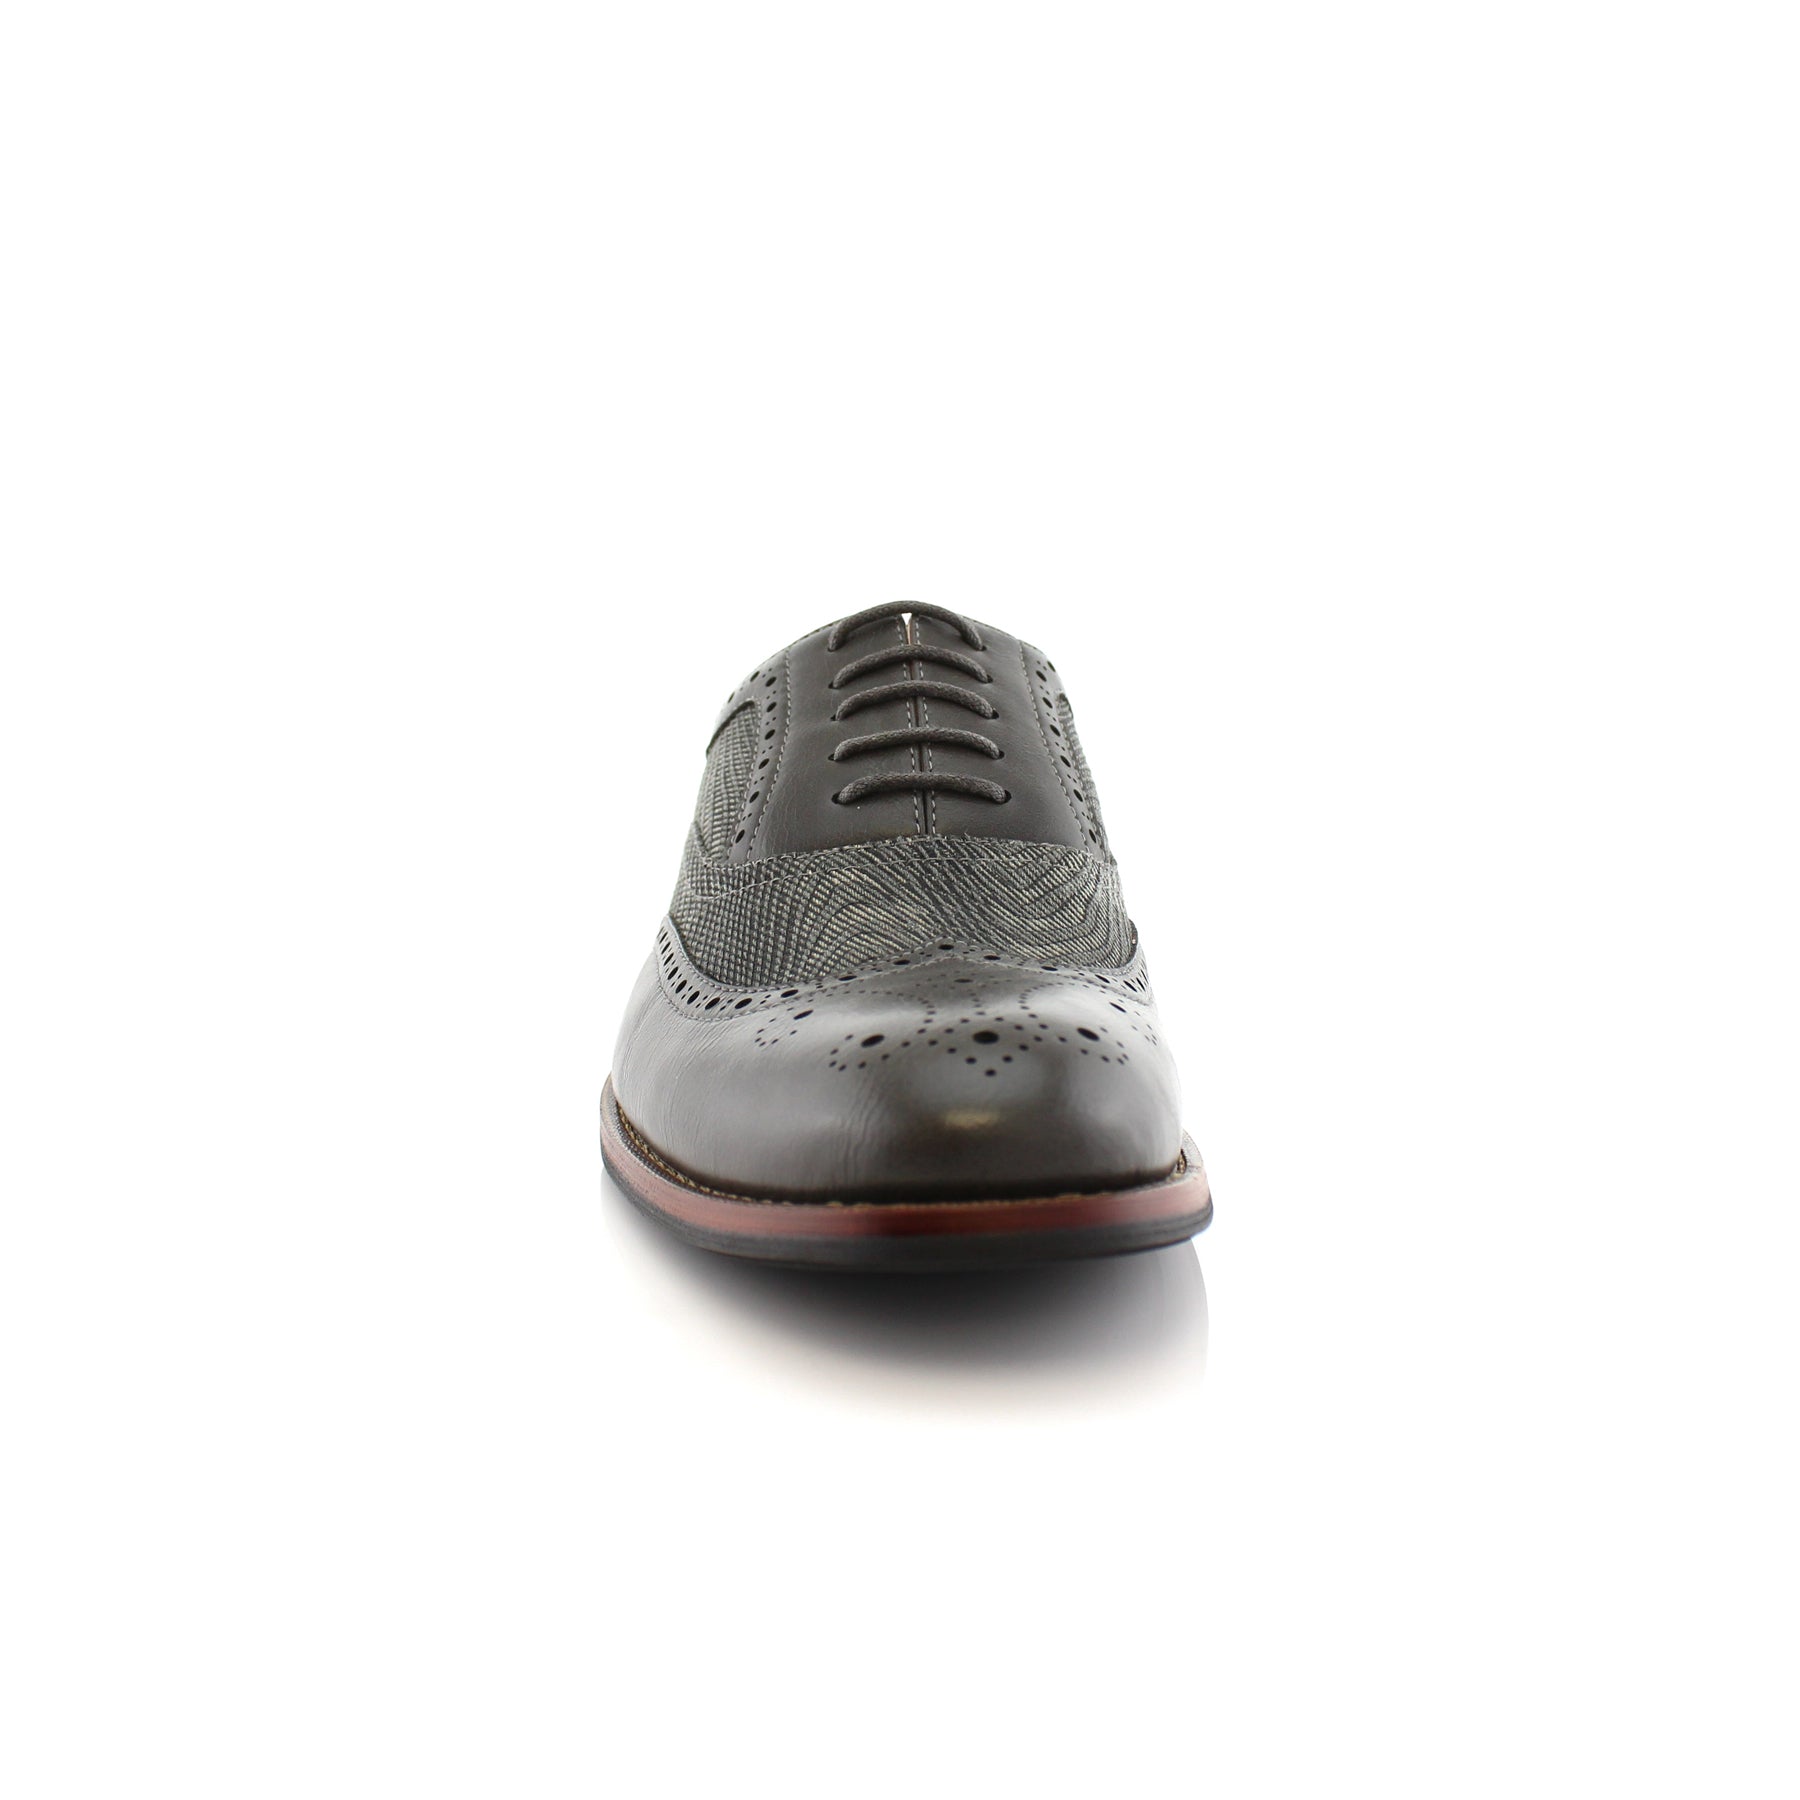 Black Wave Print Wingtip Oxfords | Alan by Ferro Aldo | Conal Footwear | Front Angle View